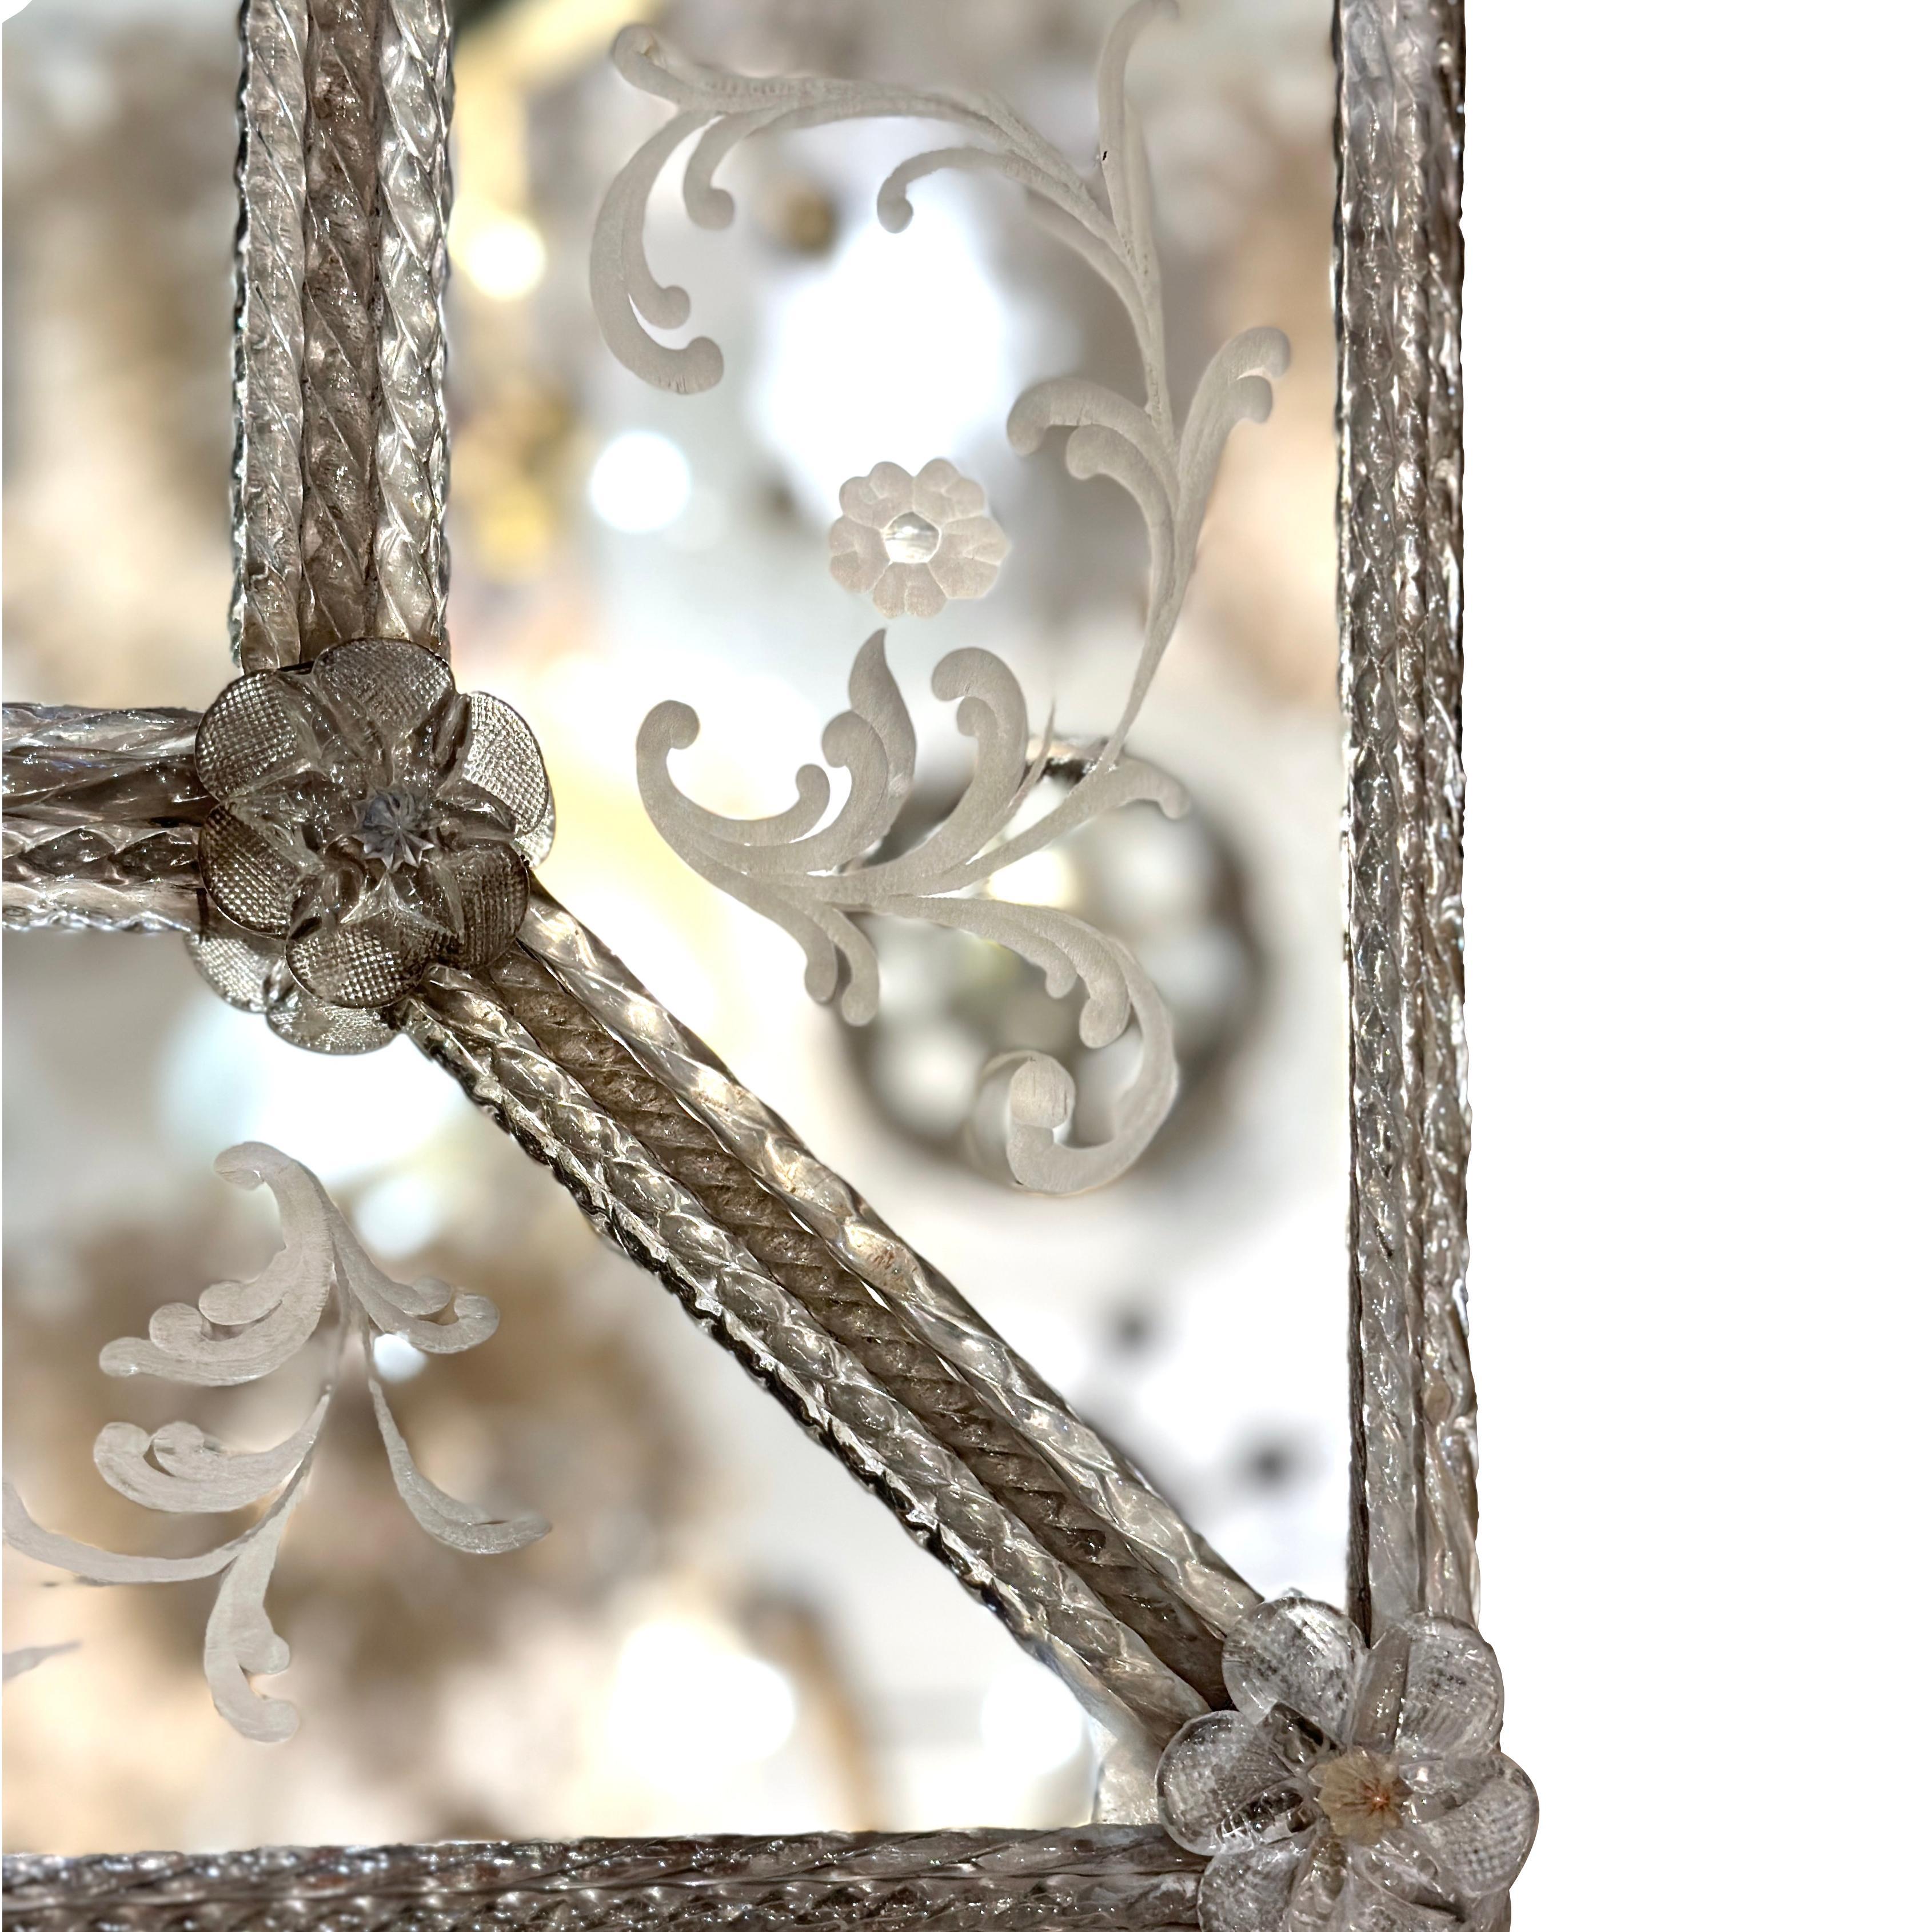 A circa 1900 Italian etched mirror with blown glass decorative elements.

Measurements:
Height: 51